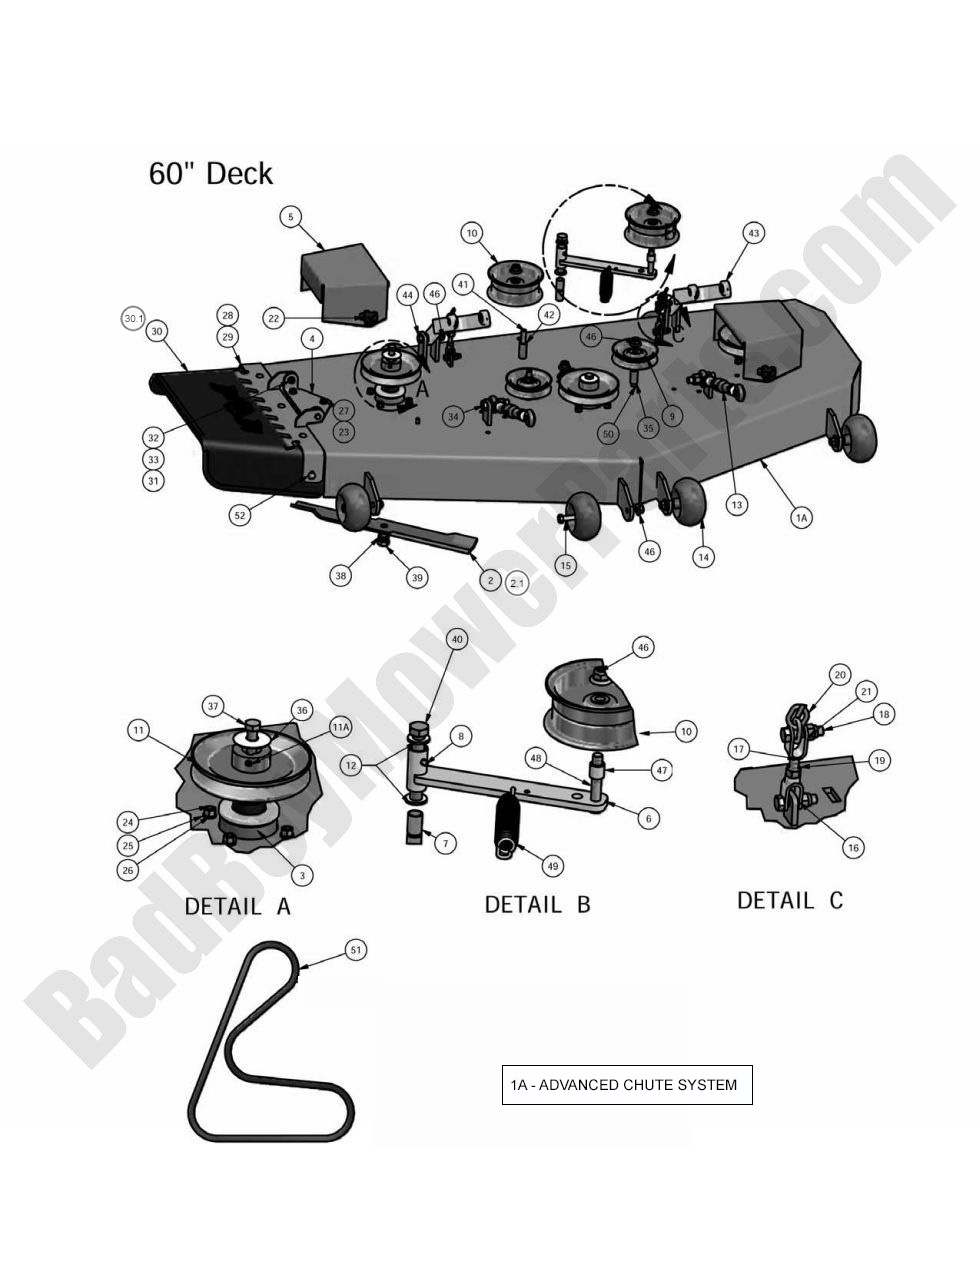 2010 Compact Diesel 60" Deck Assembly